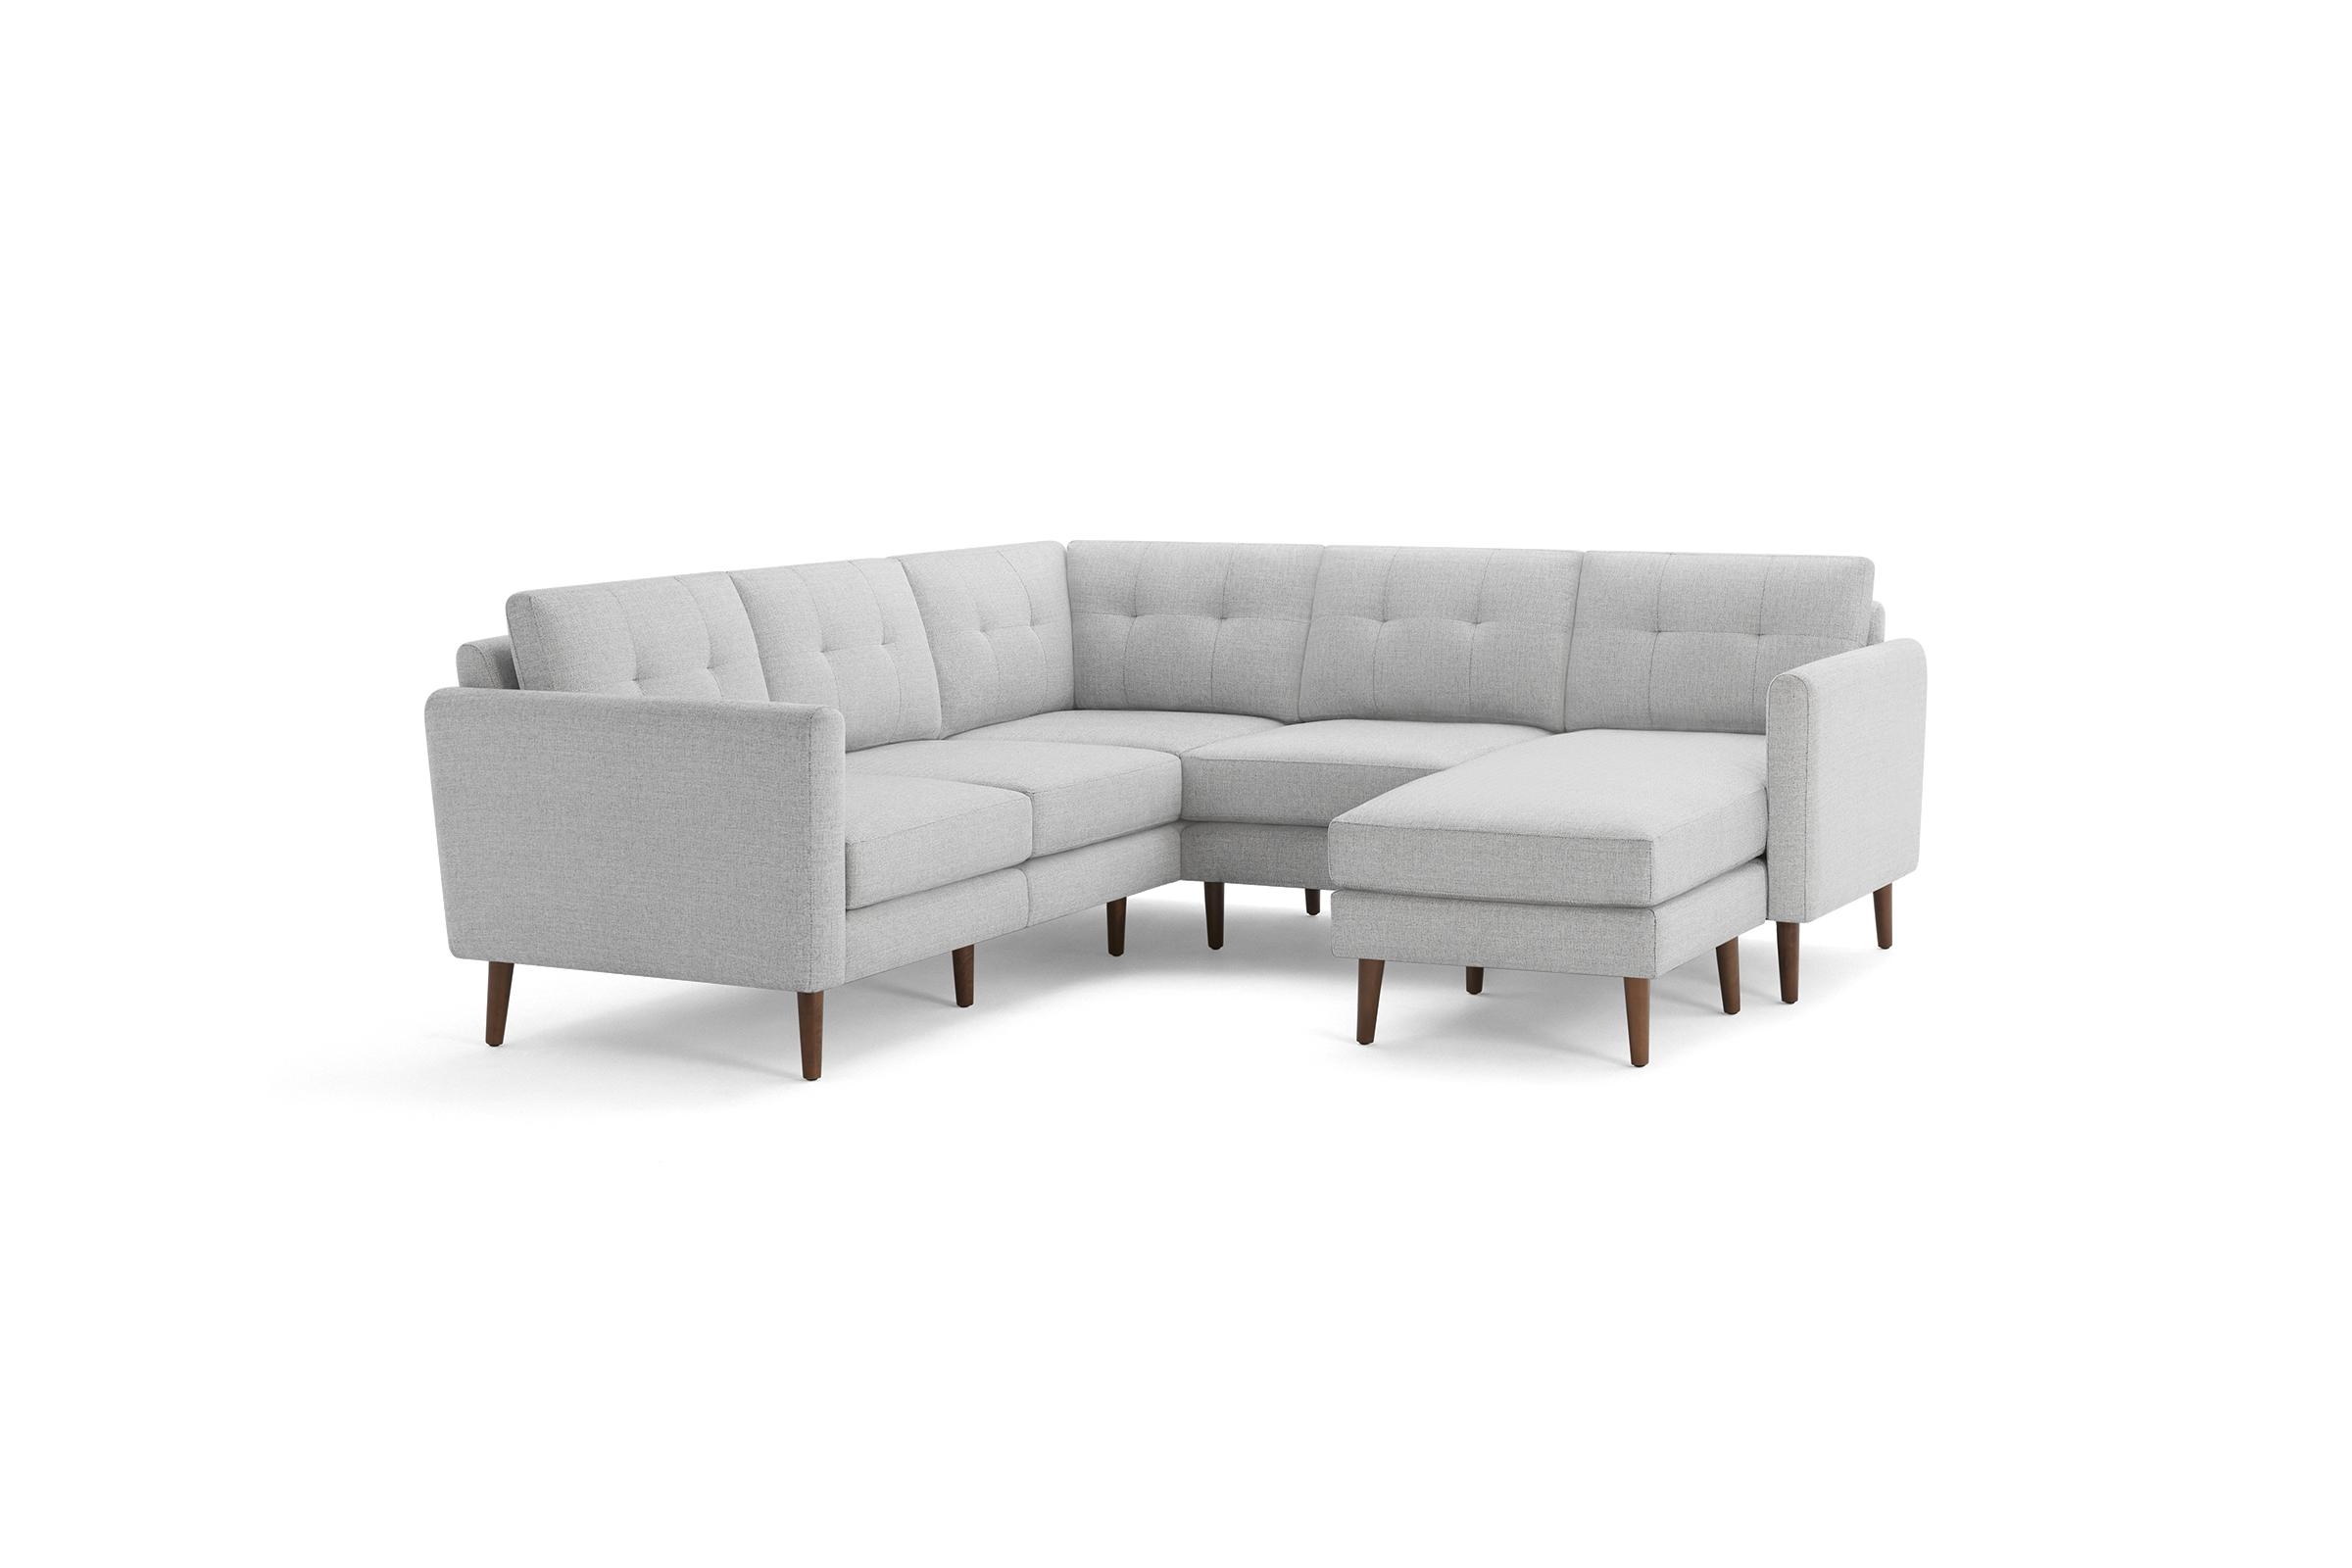 Nomad 5-Seat Corner Sectional with Chaise in Crushed Gravel, Leg Finish: WalnutLegs - Image 0